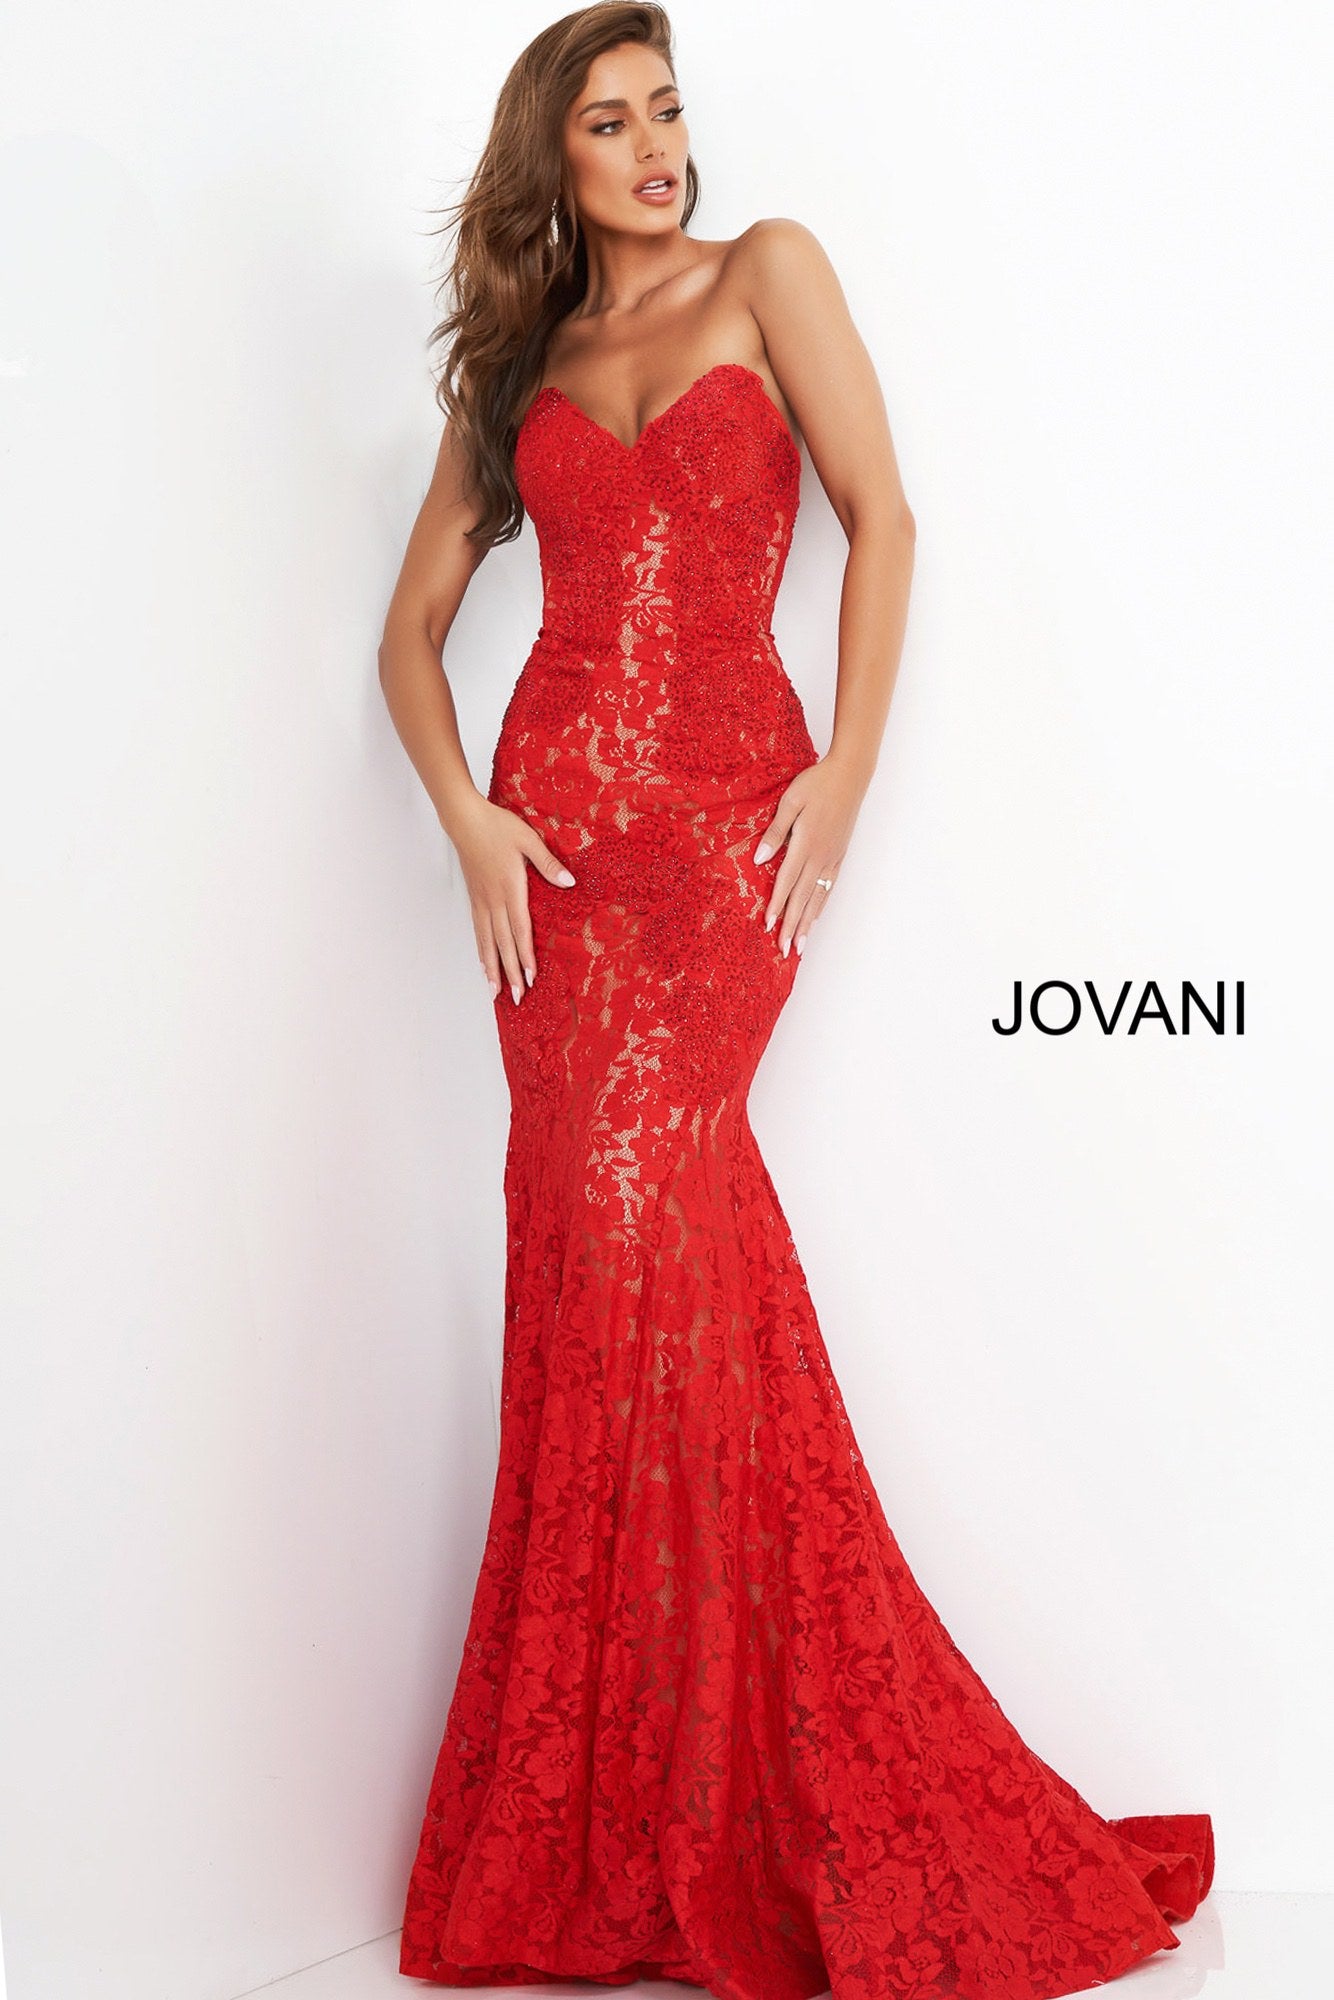 Jovani 37334 strapless embellished lace prom dress Fitted Mermaid Long peak point neckline